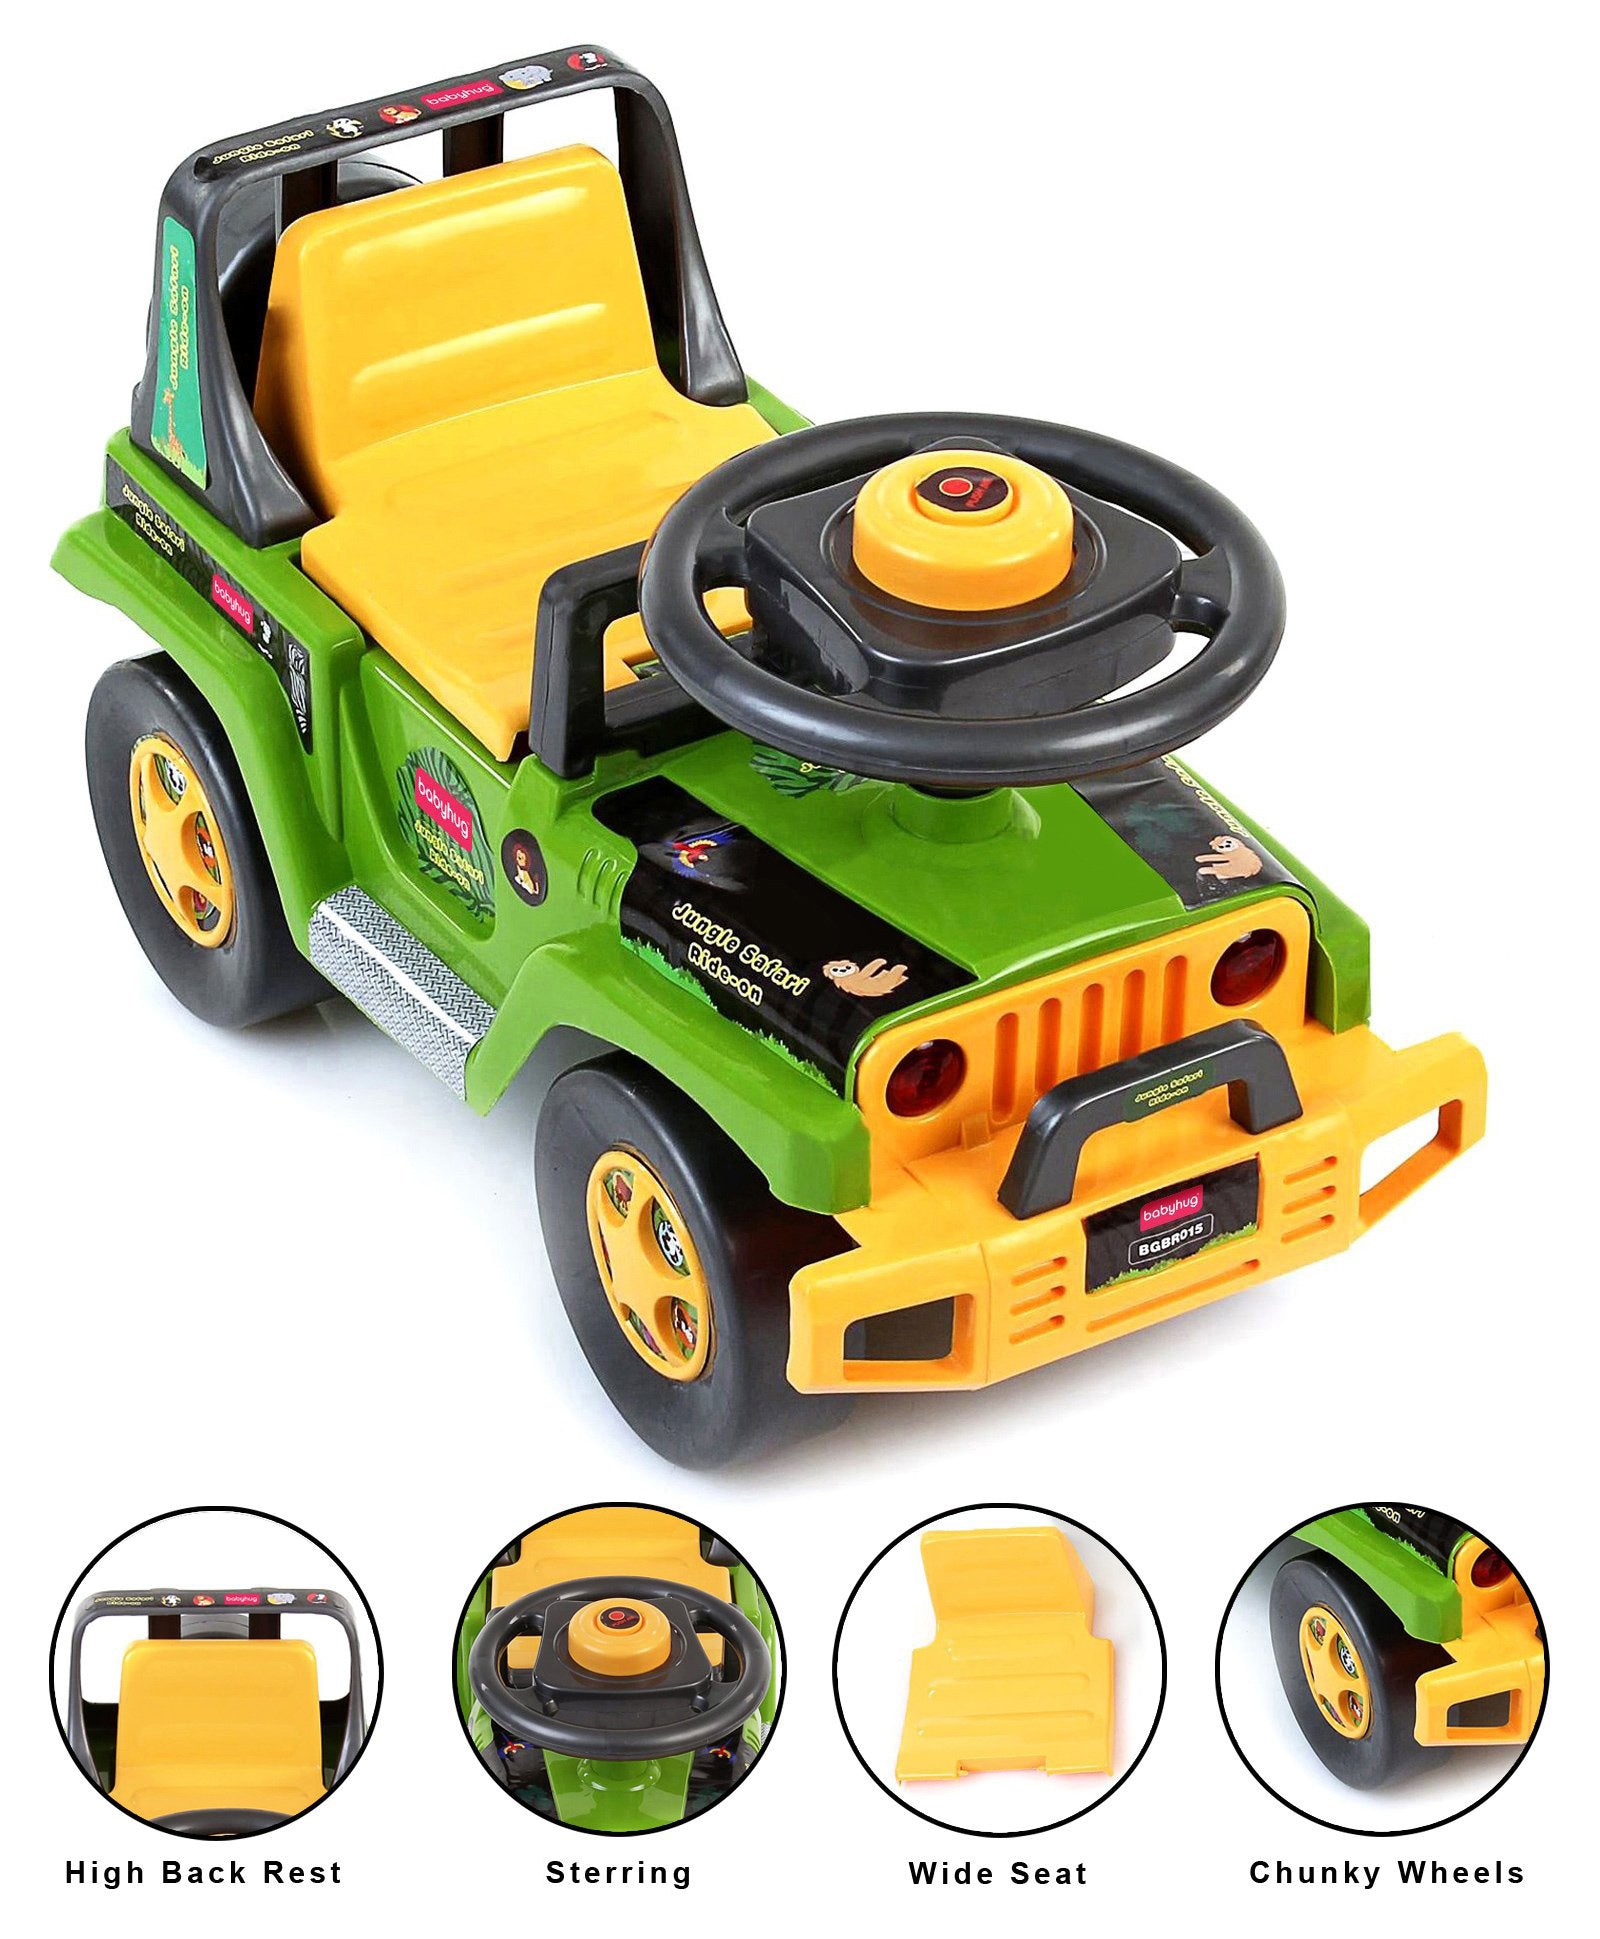 Babyhug Jungle Safari Foot To Floor Ride-On - Green & Yellow | Kids Toddler Ride-On Toy with Jungle Theme, Foot-Powered Ride-On Car for Indoor and Outdoor Fun